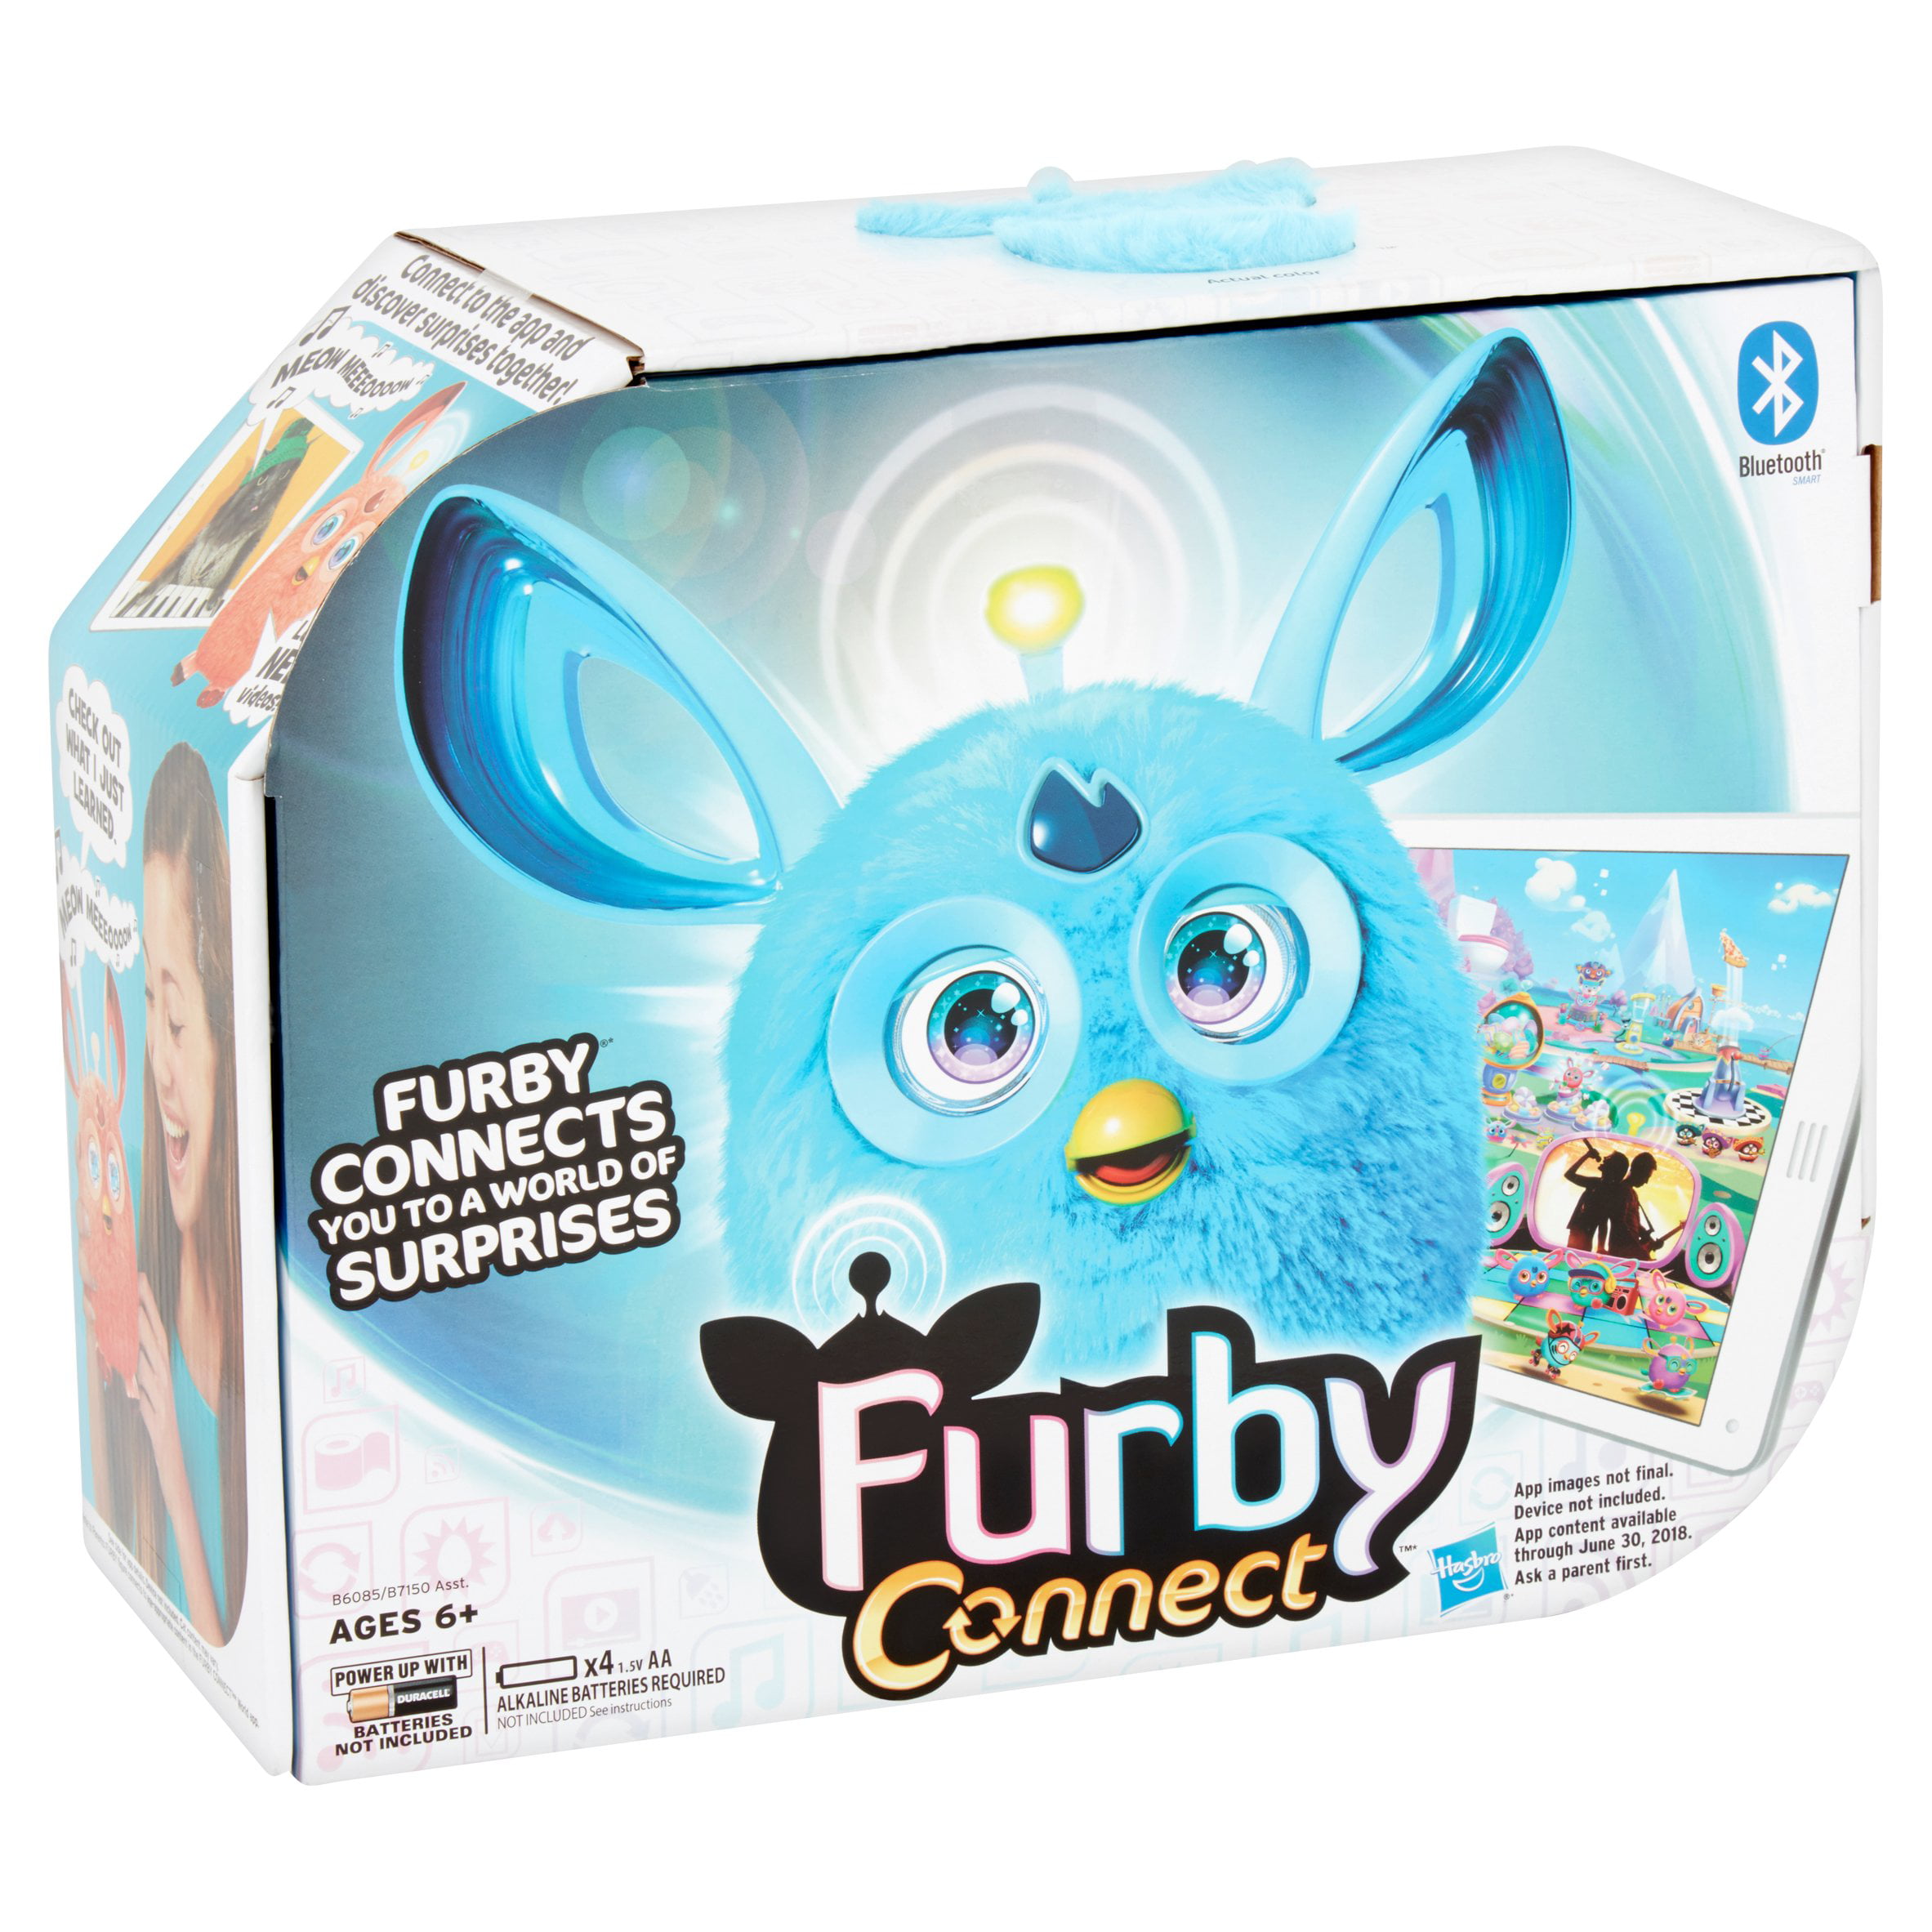 Furby Connect New Exclusive Launch Hasbro Bluetooth Teal Blue 